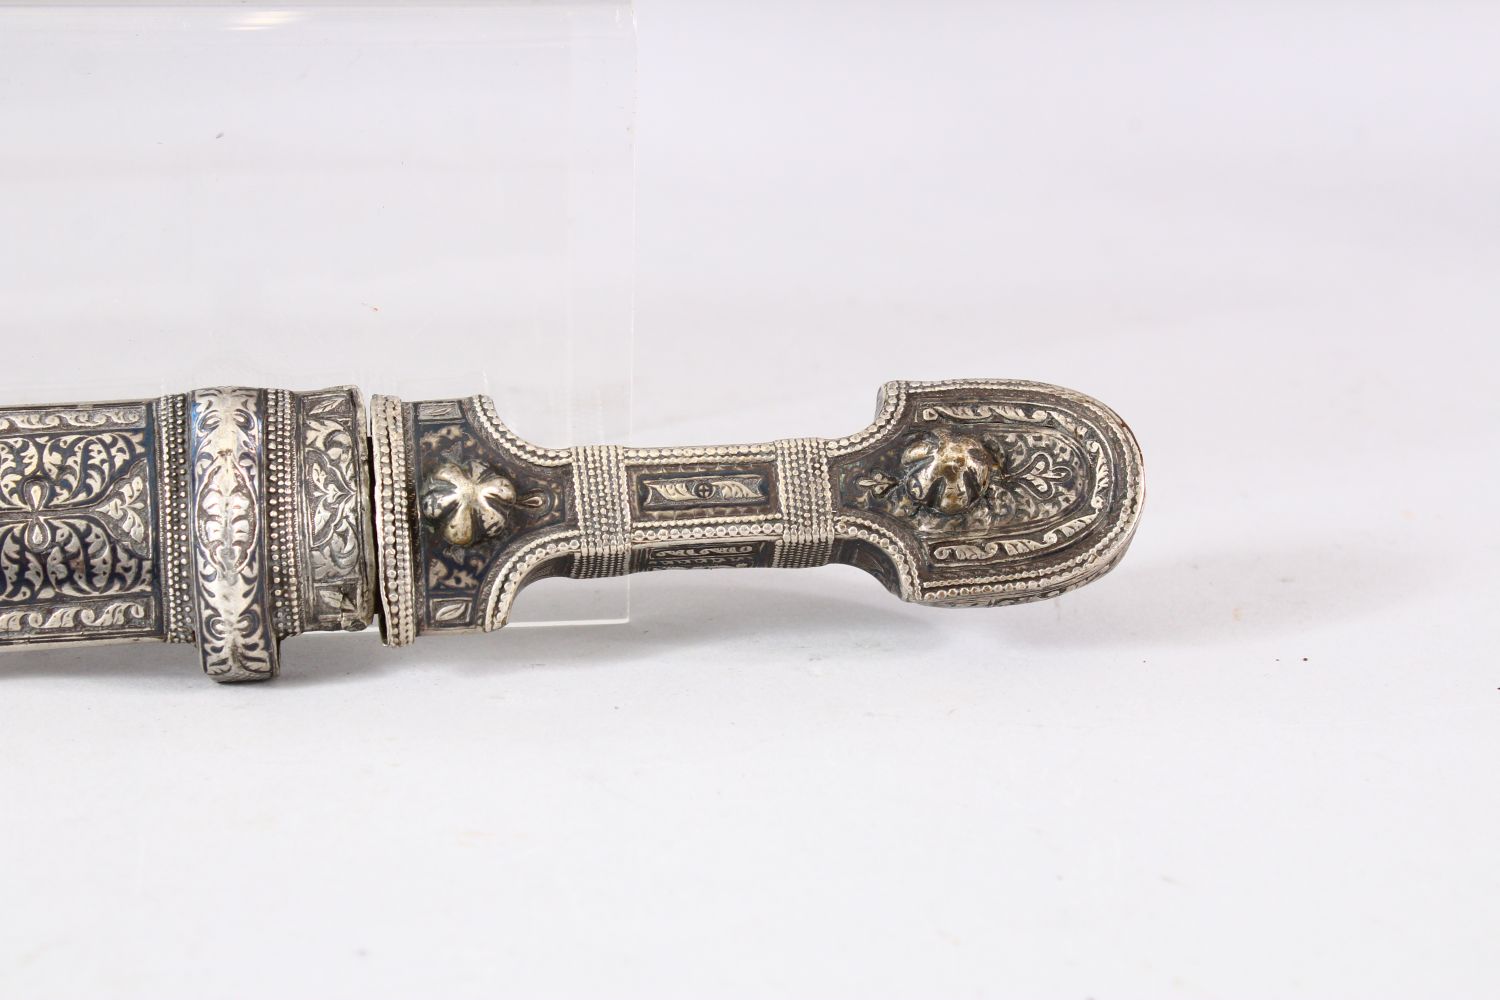 A 19TH CENTURY KINDJAL DAGGER and scabbard, 47.5cm long. - Image 5 of 8